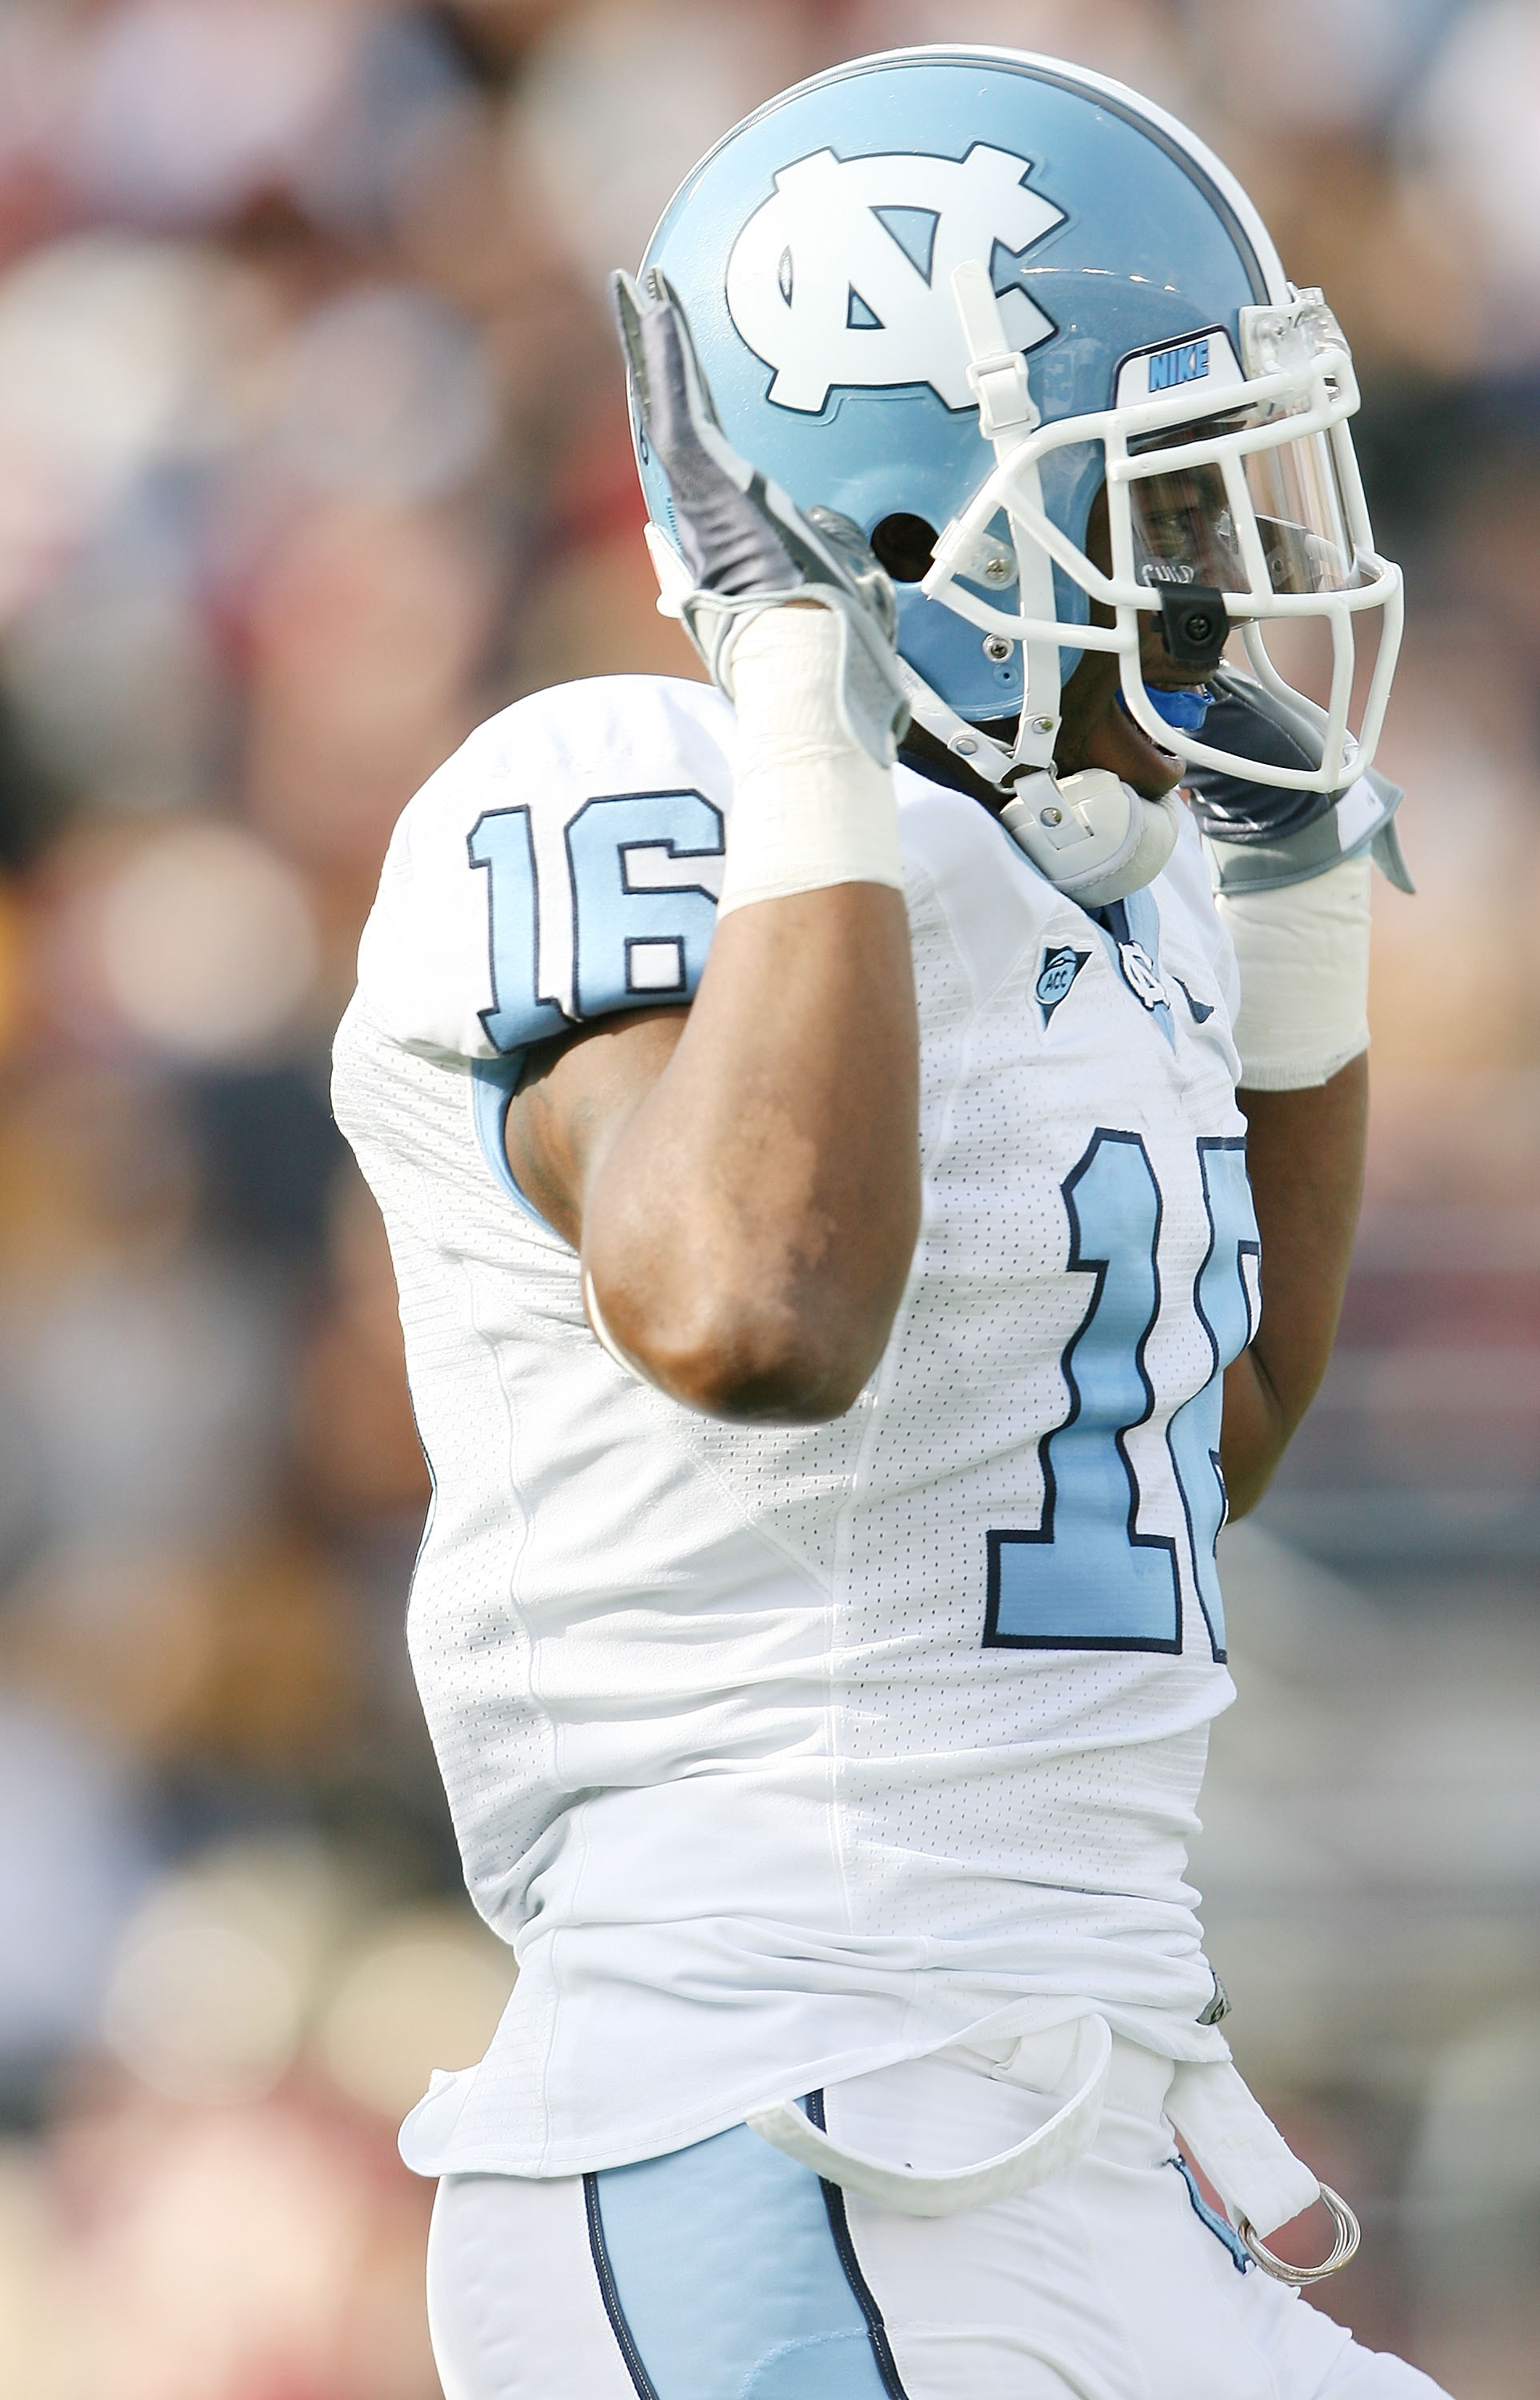 CHESTNUT HILL, MA - NOVEMBER 21:  Kendric Burney #16 of the North Carolina Tar Heels celebrates his touchdown in the first quarter against the Boston College Eagles on November 21, 2009 at Alumni Stadium in Chestnut Hill, Massachusetts.  (Photo by Elsa/Ge